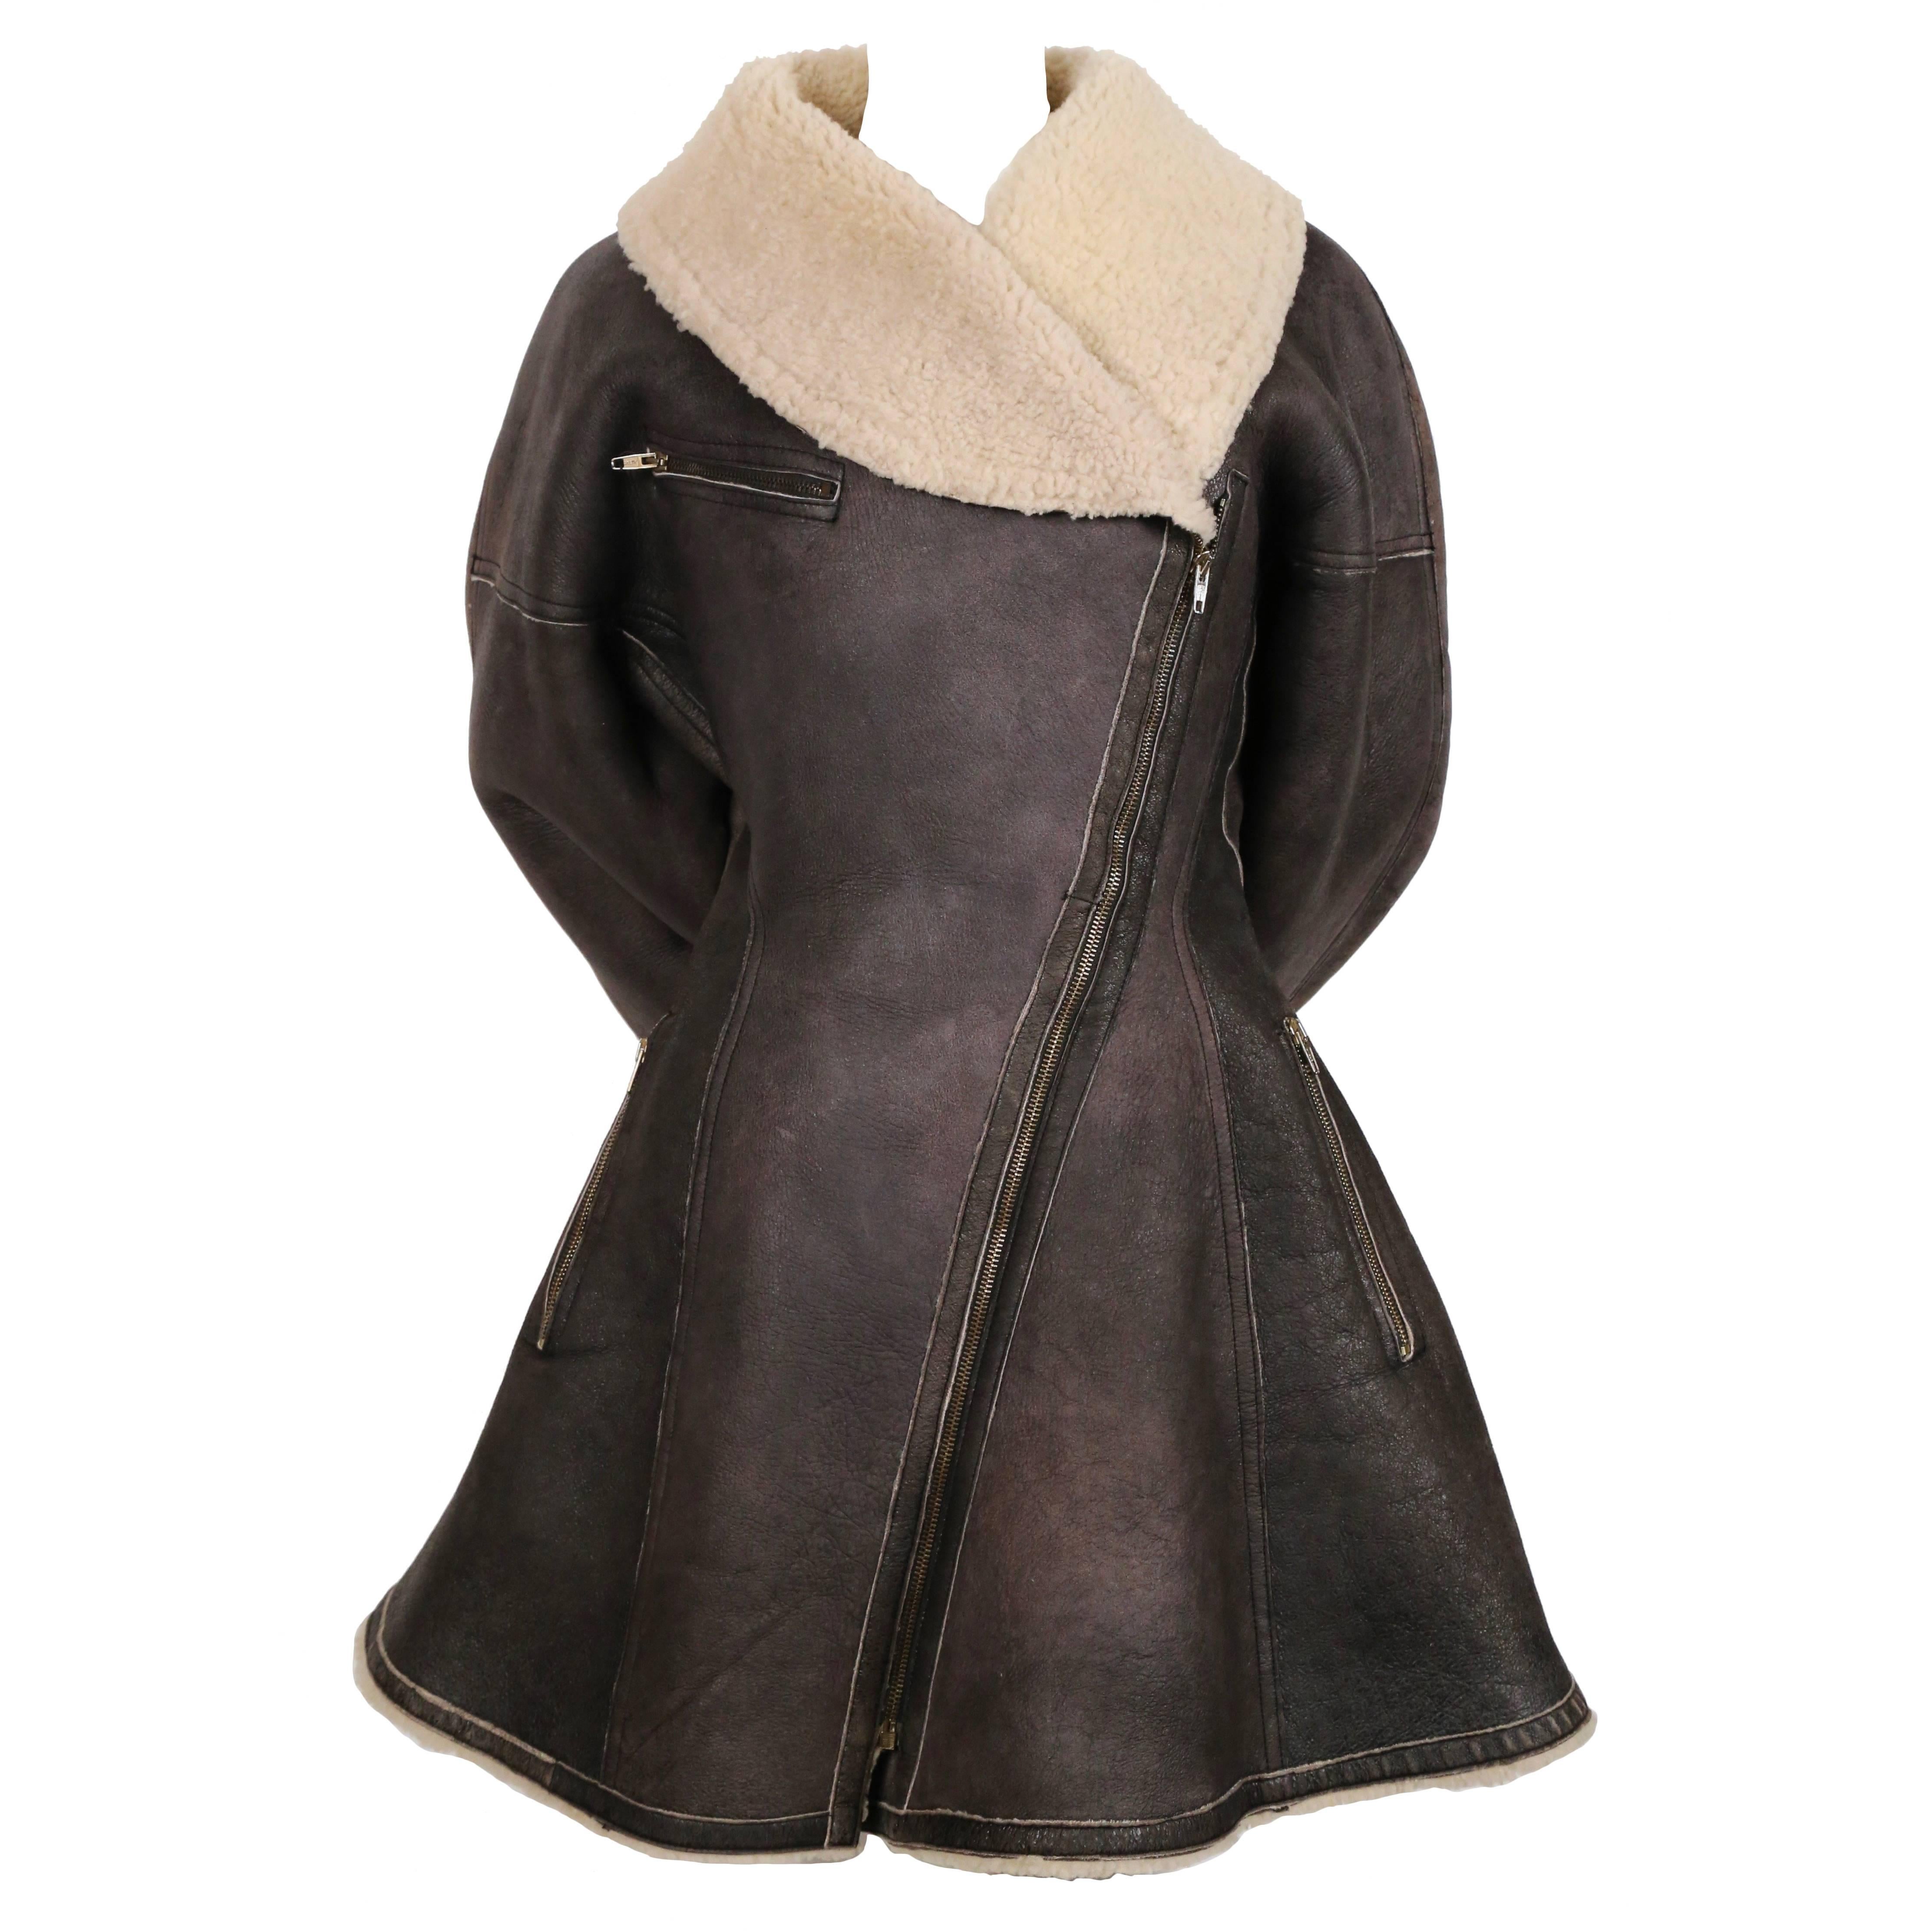 1987 AZZEDINE ALAIA flared brown shearling coat with shawl collar